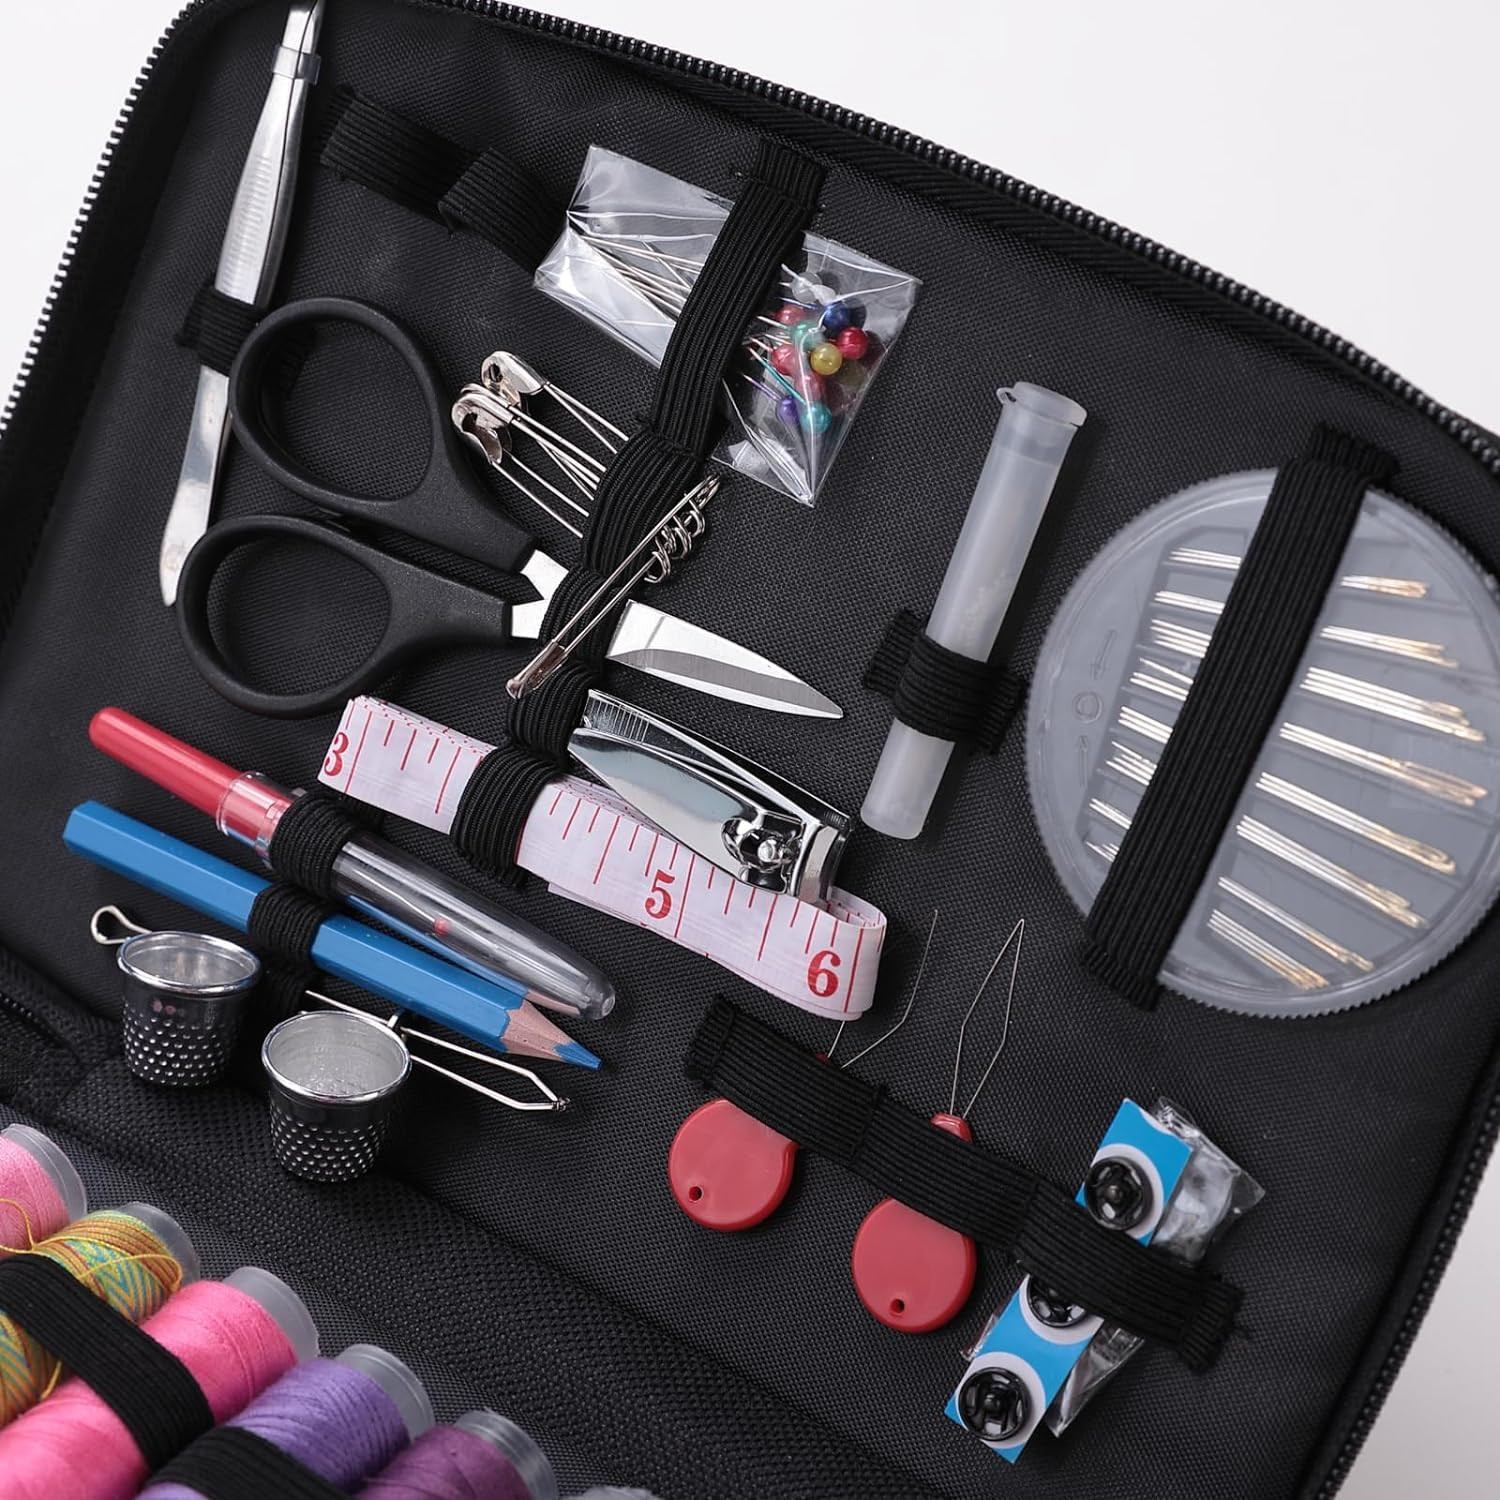 Kuber Industries Multifunctional Sewing Kit Set Of 97|Silai Machine Tools With Cotton & Polyester Thread|Steel Secissors & Needles (Black)